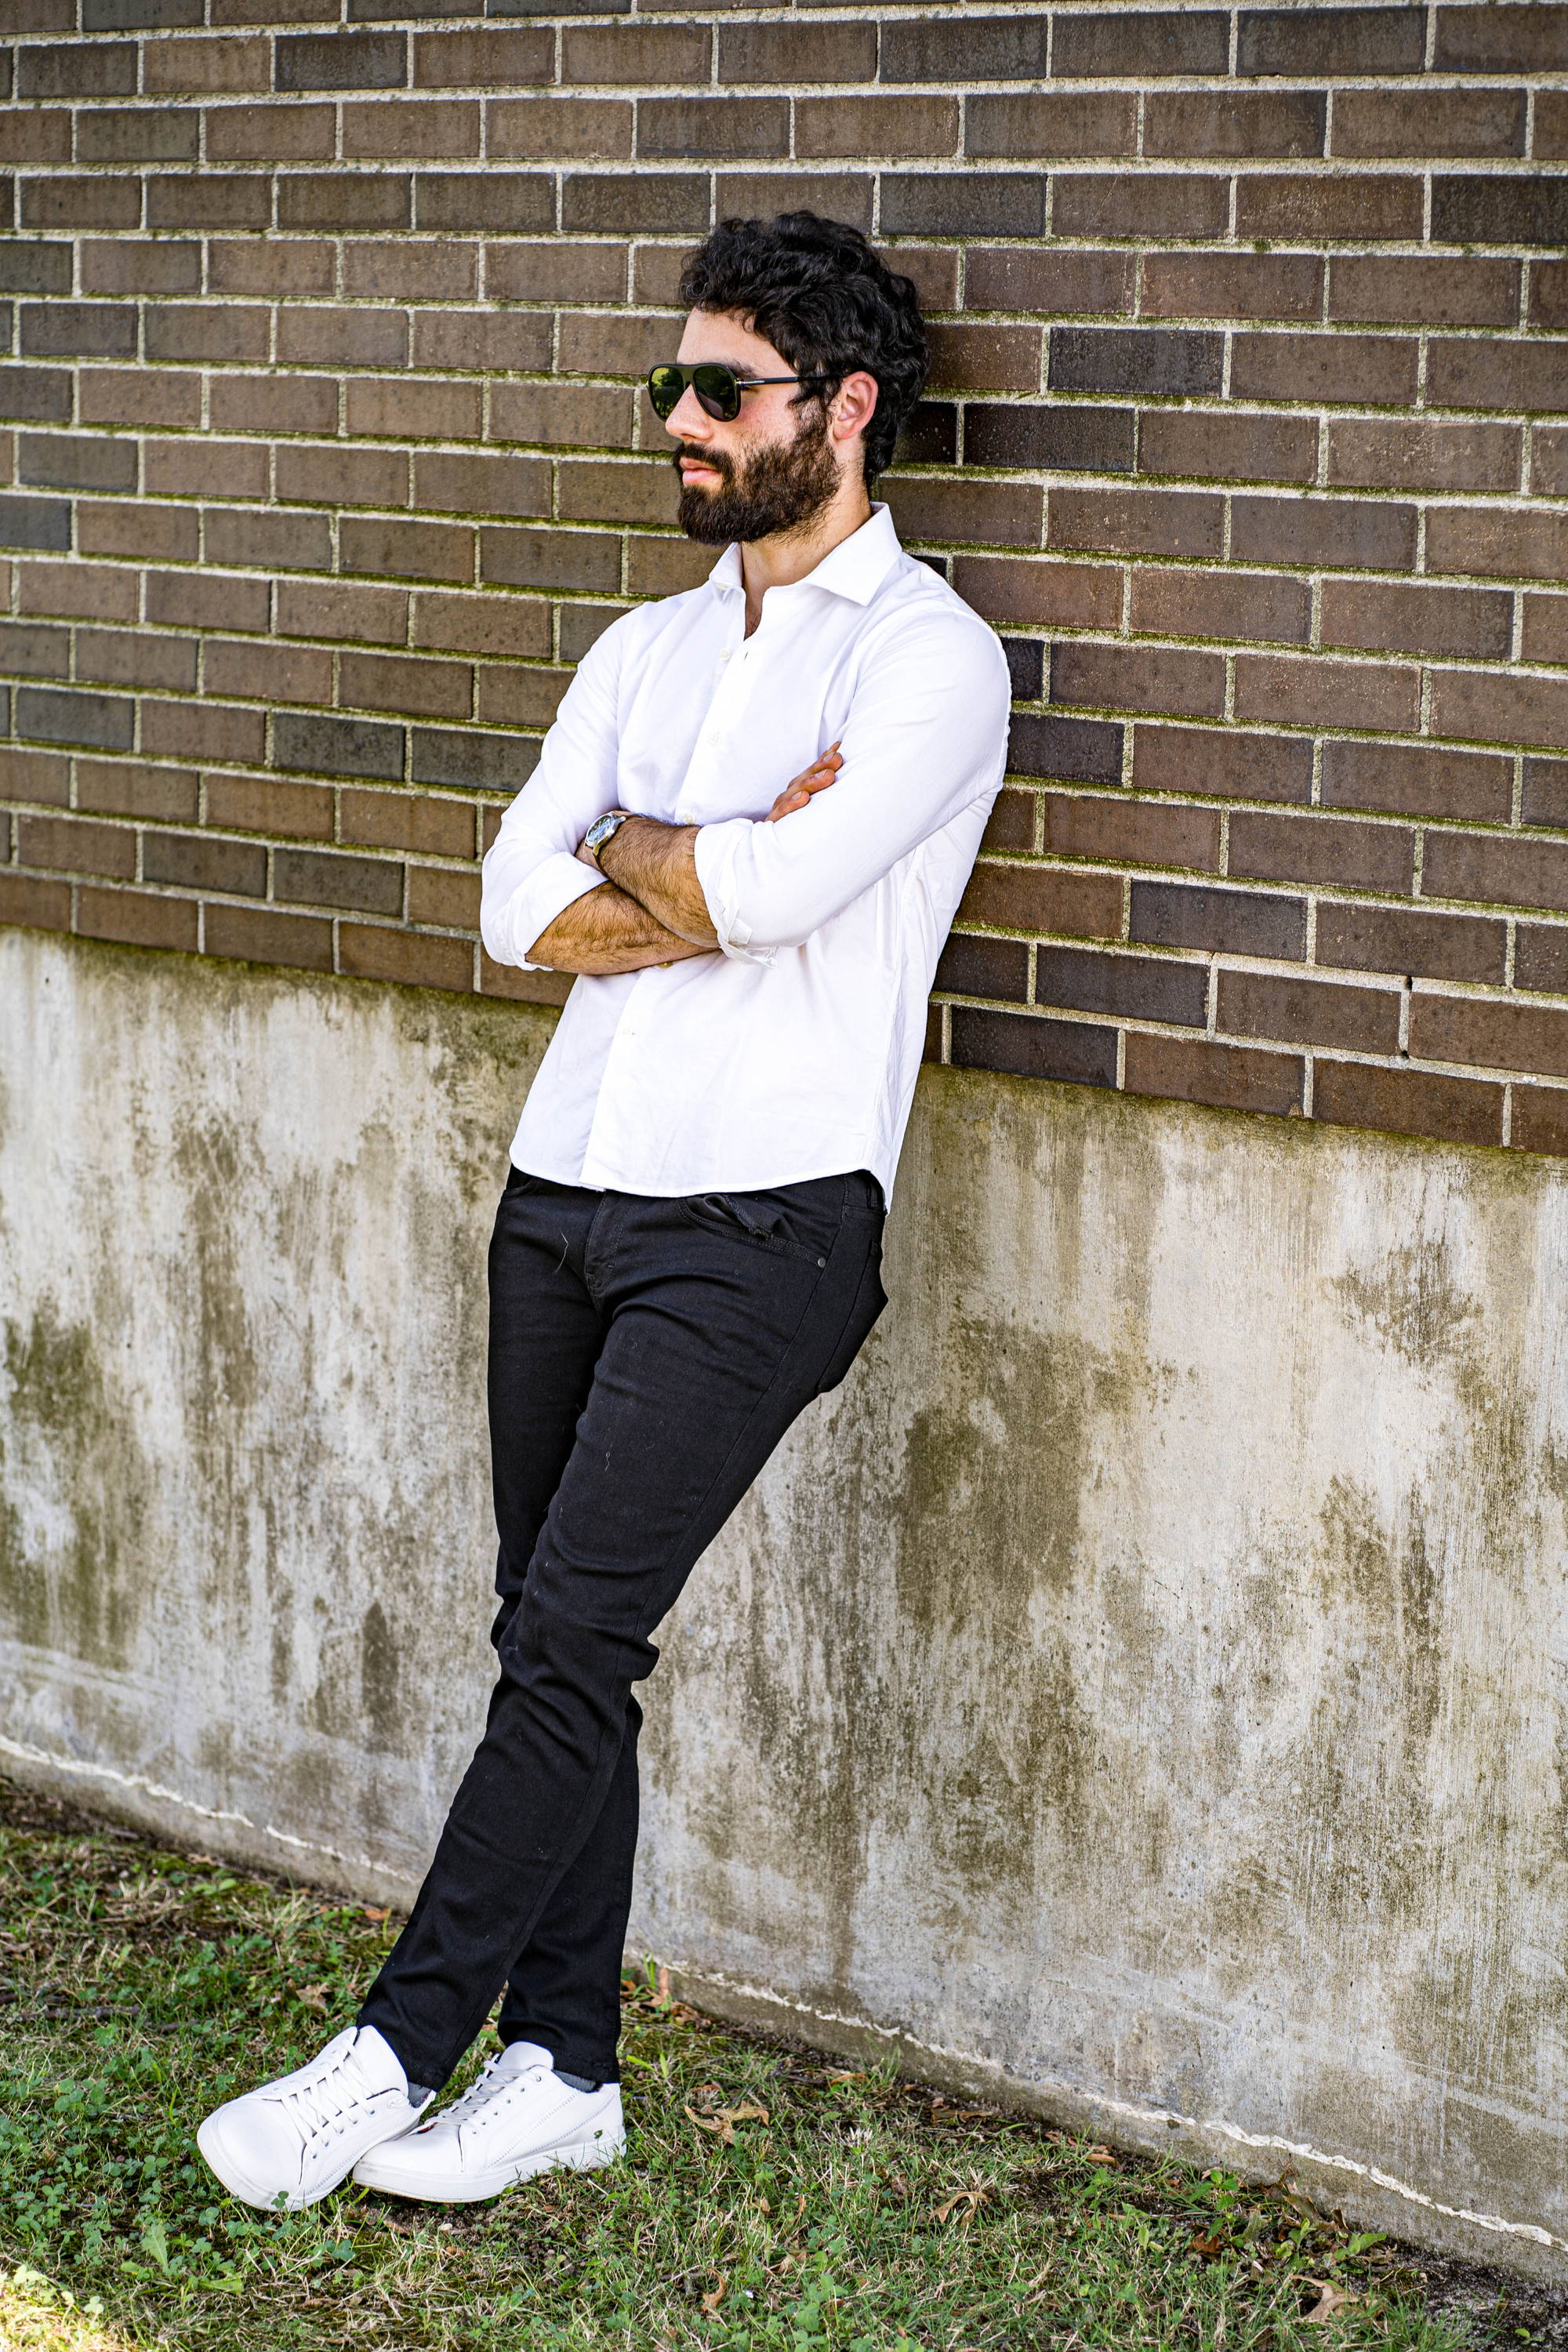 Man leaning against a brick wall with arms folded wearing a white button down shirt and black stretch jeans from under510.com